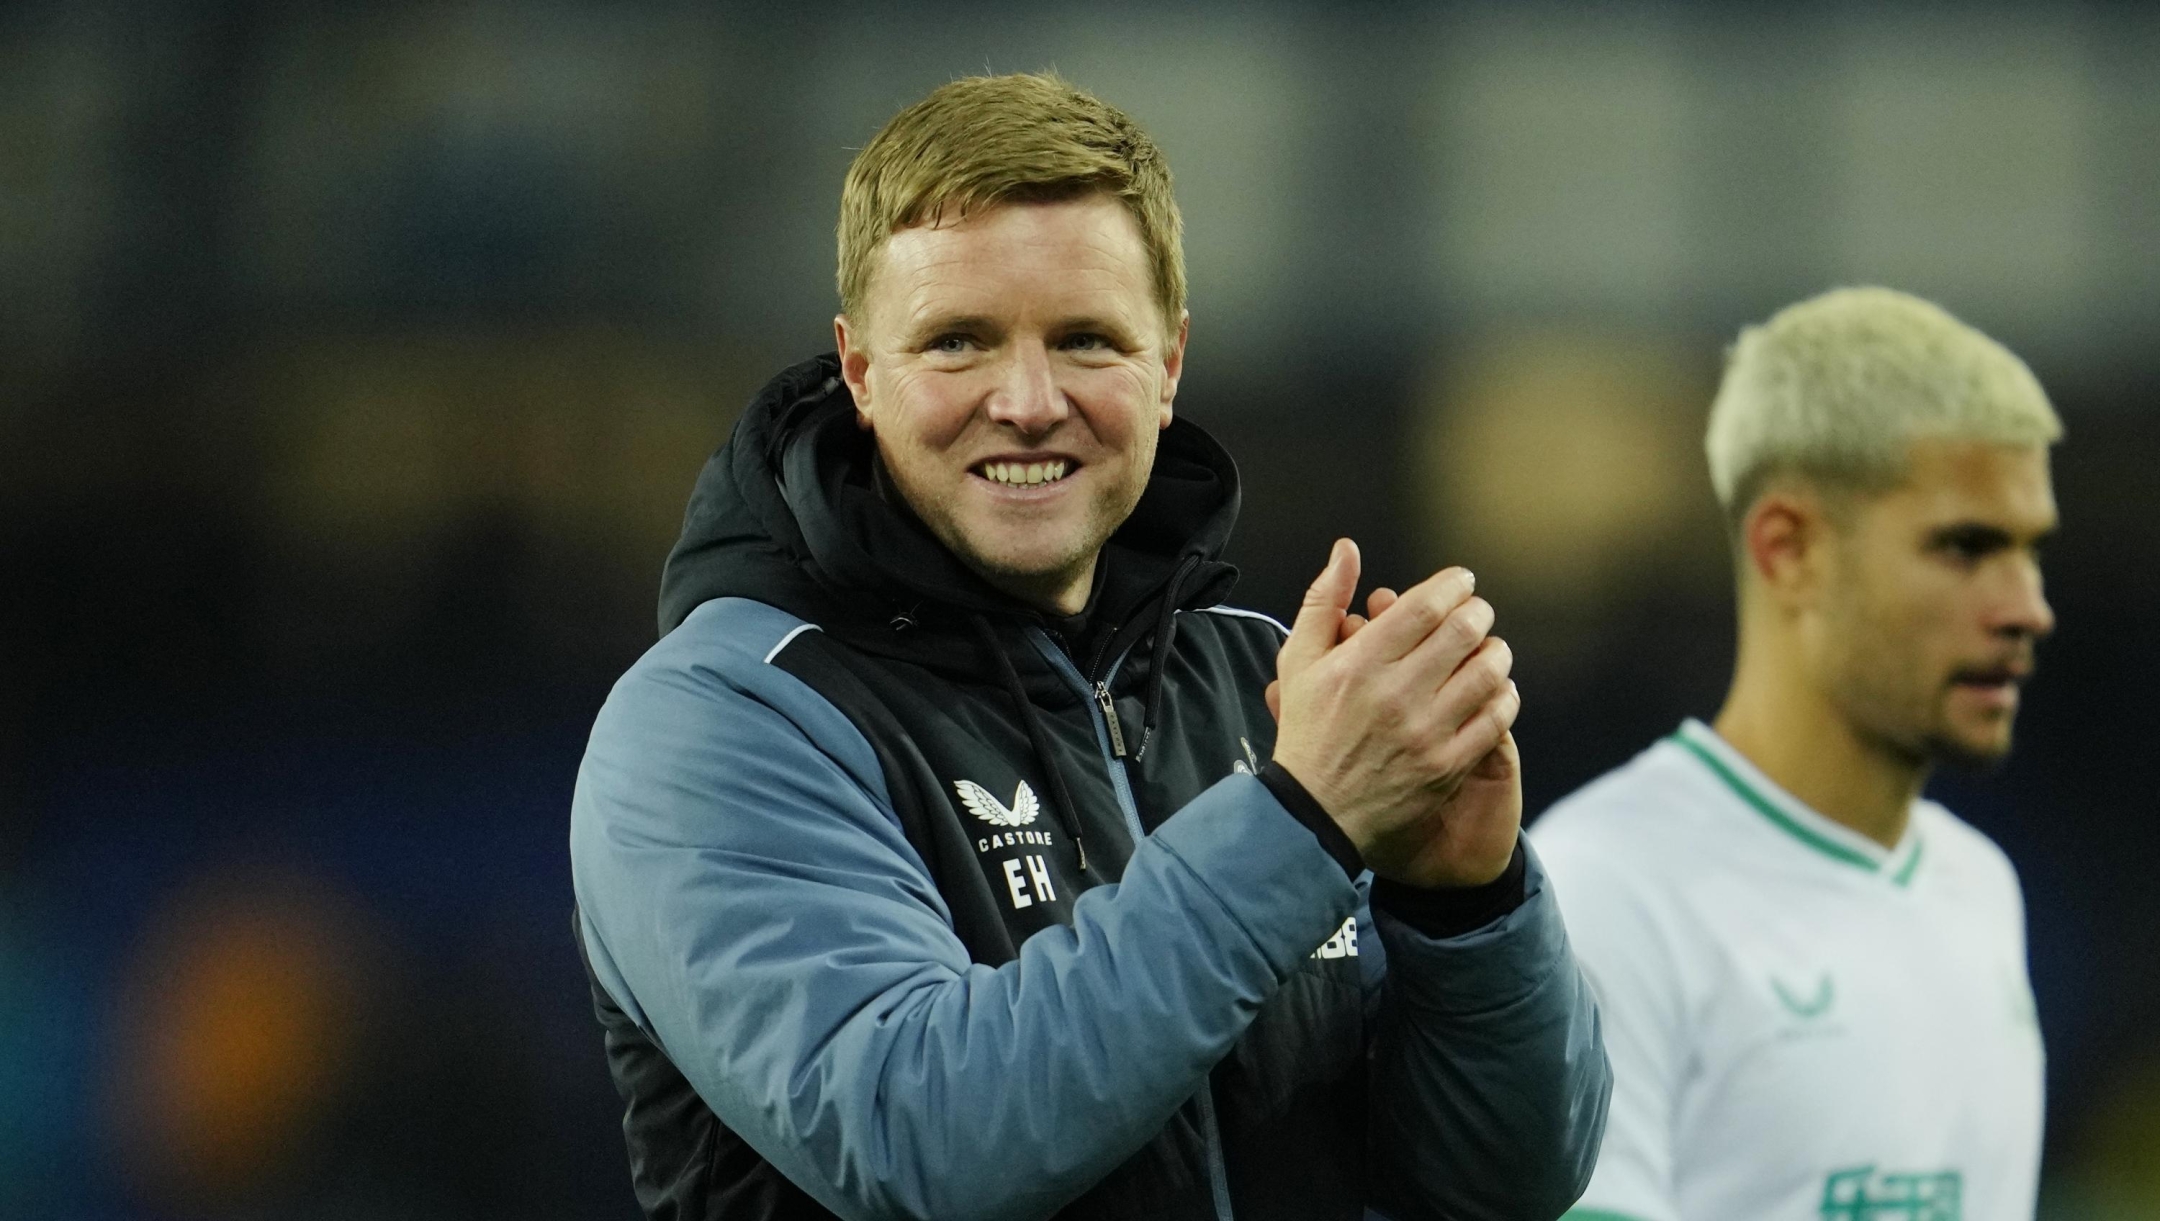 Newcastle's head coach Eddie Howe, centre, celebrates after the English Premier League soccer match between Everton and Newcastle United at the Goodison Park stadium in Liverpool, England, Thursday, April 27, 2023. (AP Photo/Jon Super)